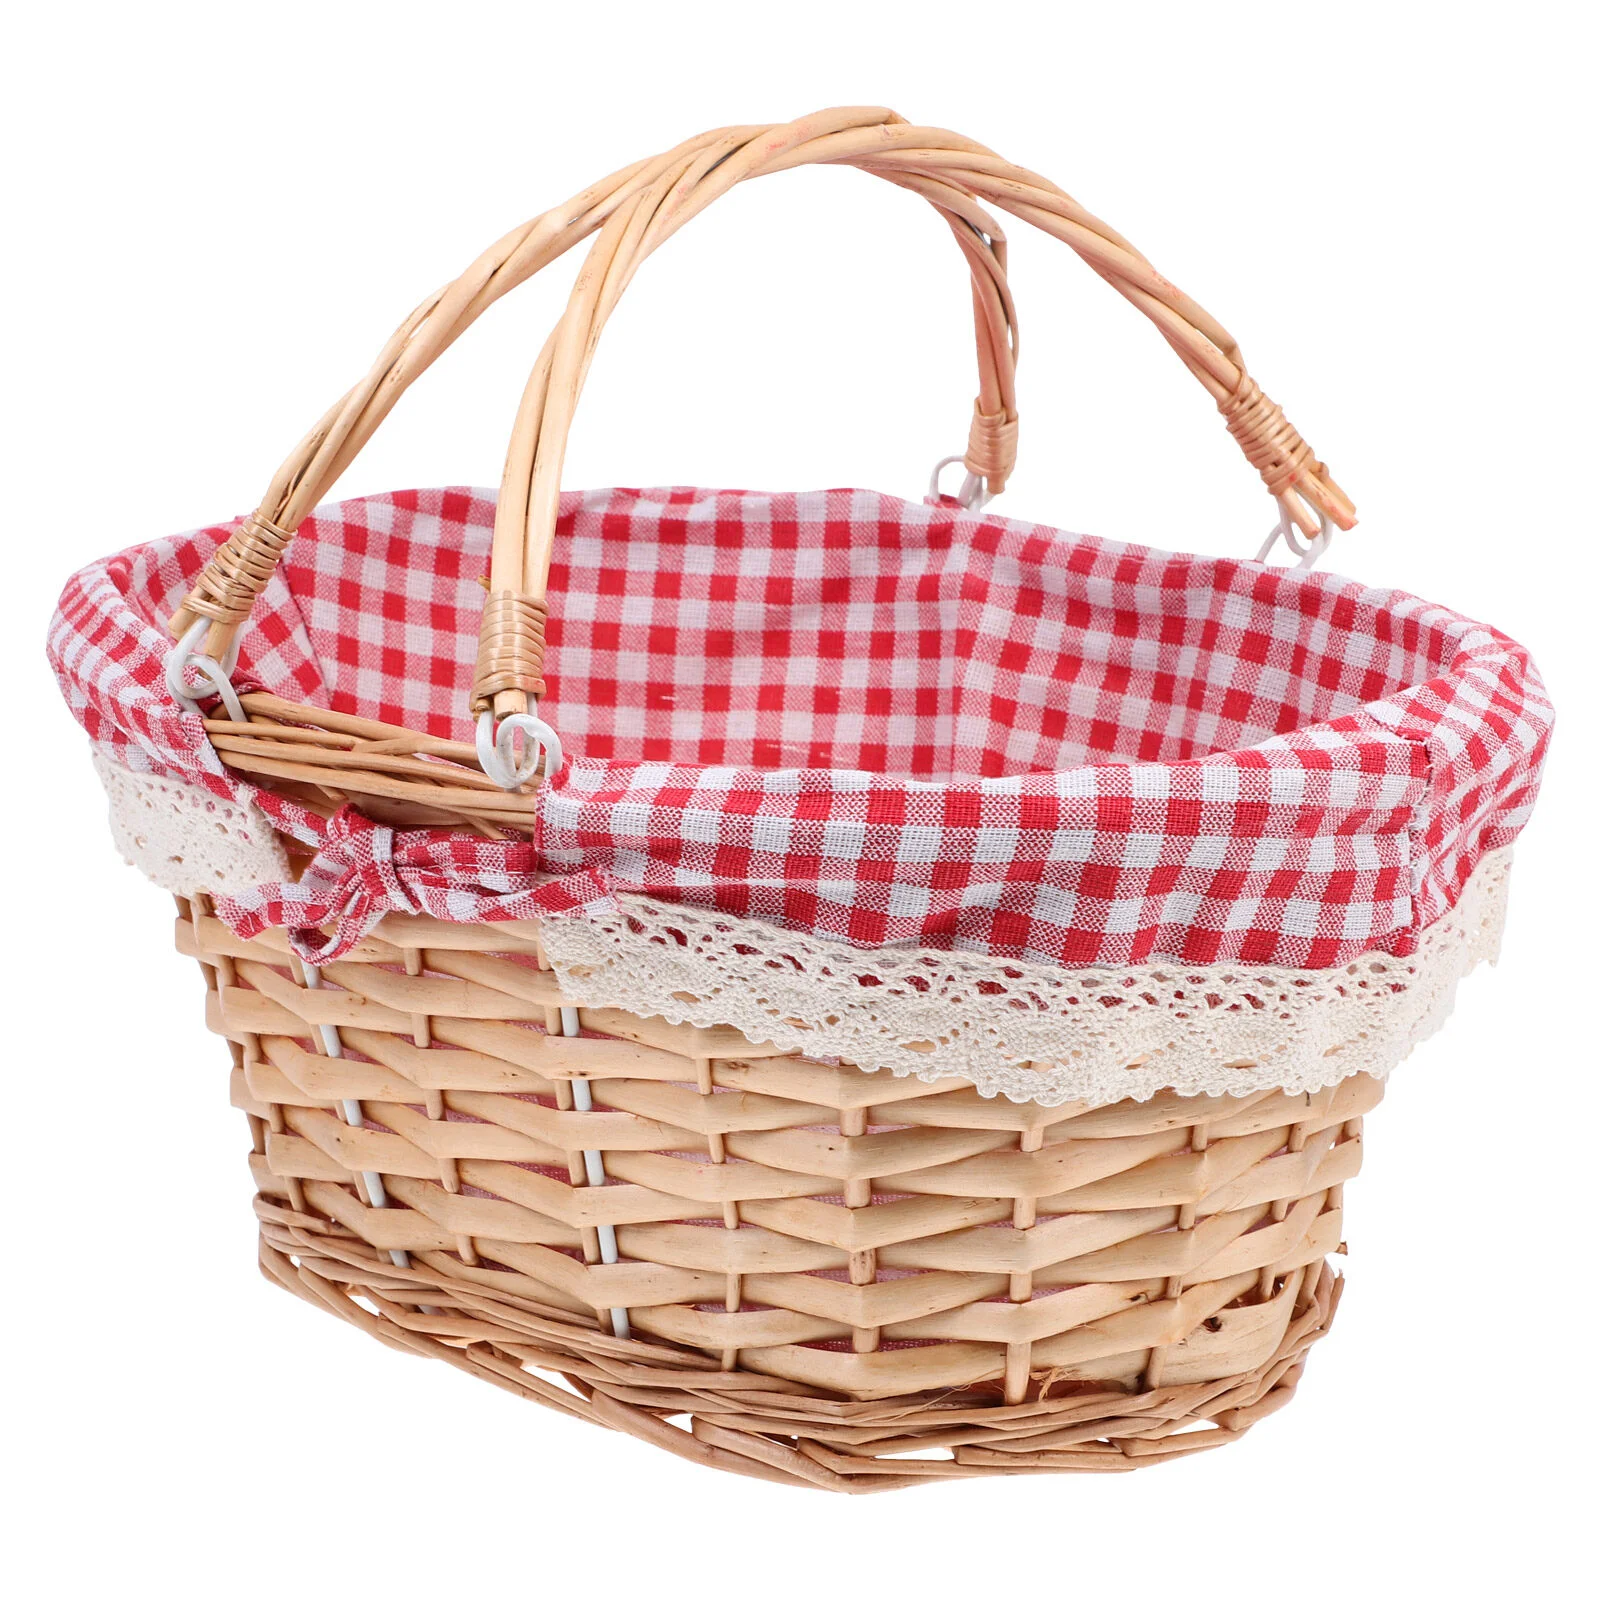 

Picnic Basket Decorative Dried Flower Rattan Baskets Storage Gift Wrapping Woven Multi-purpose Blanket Exquisite Photo Prop